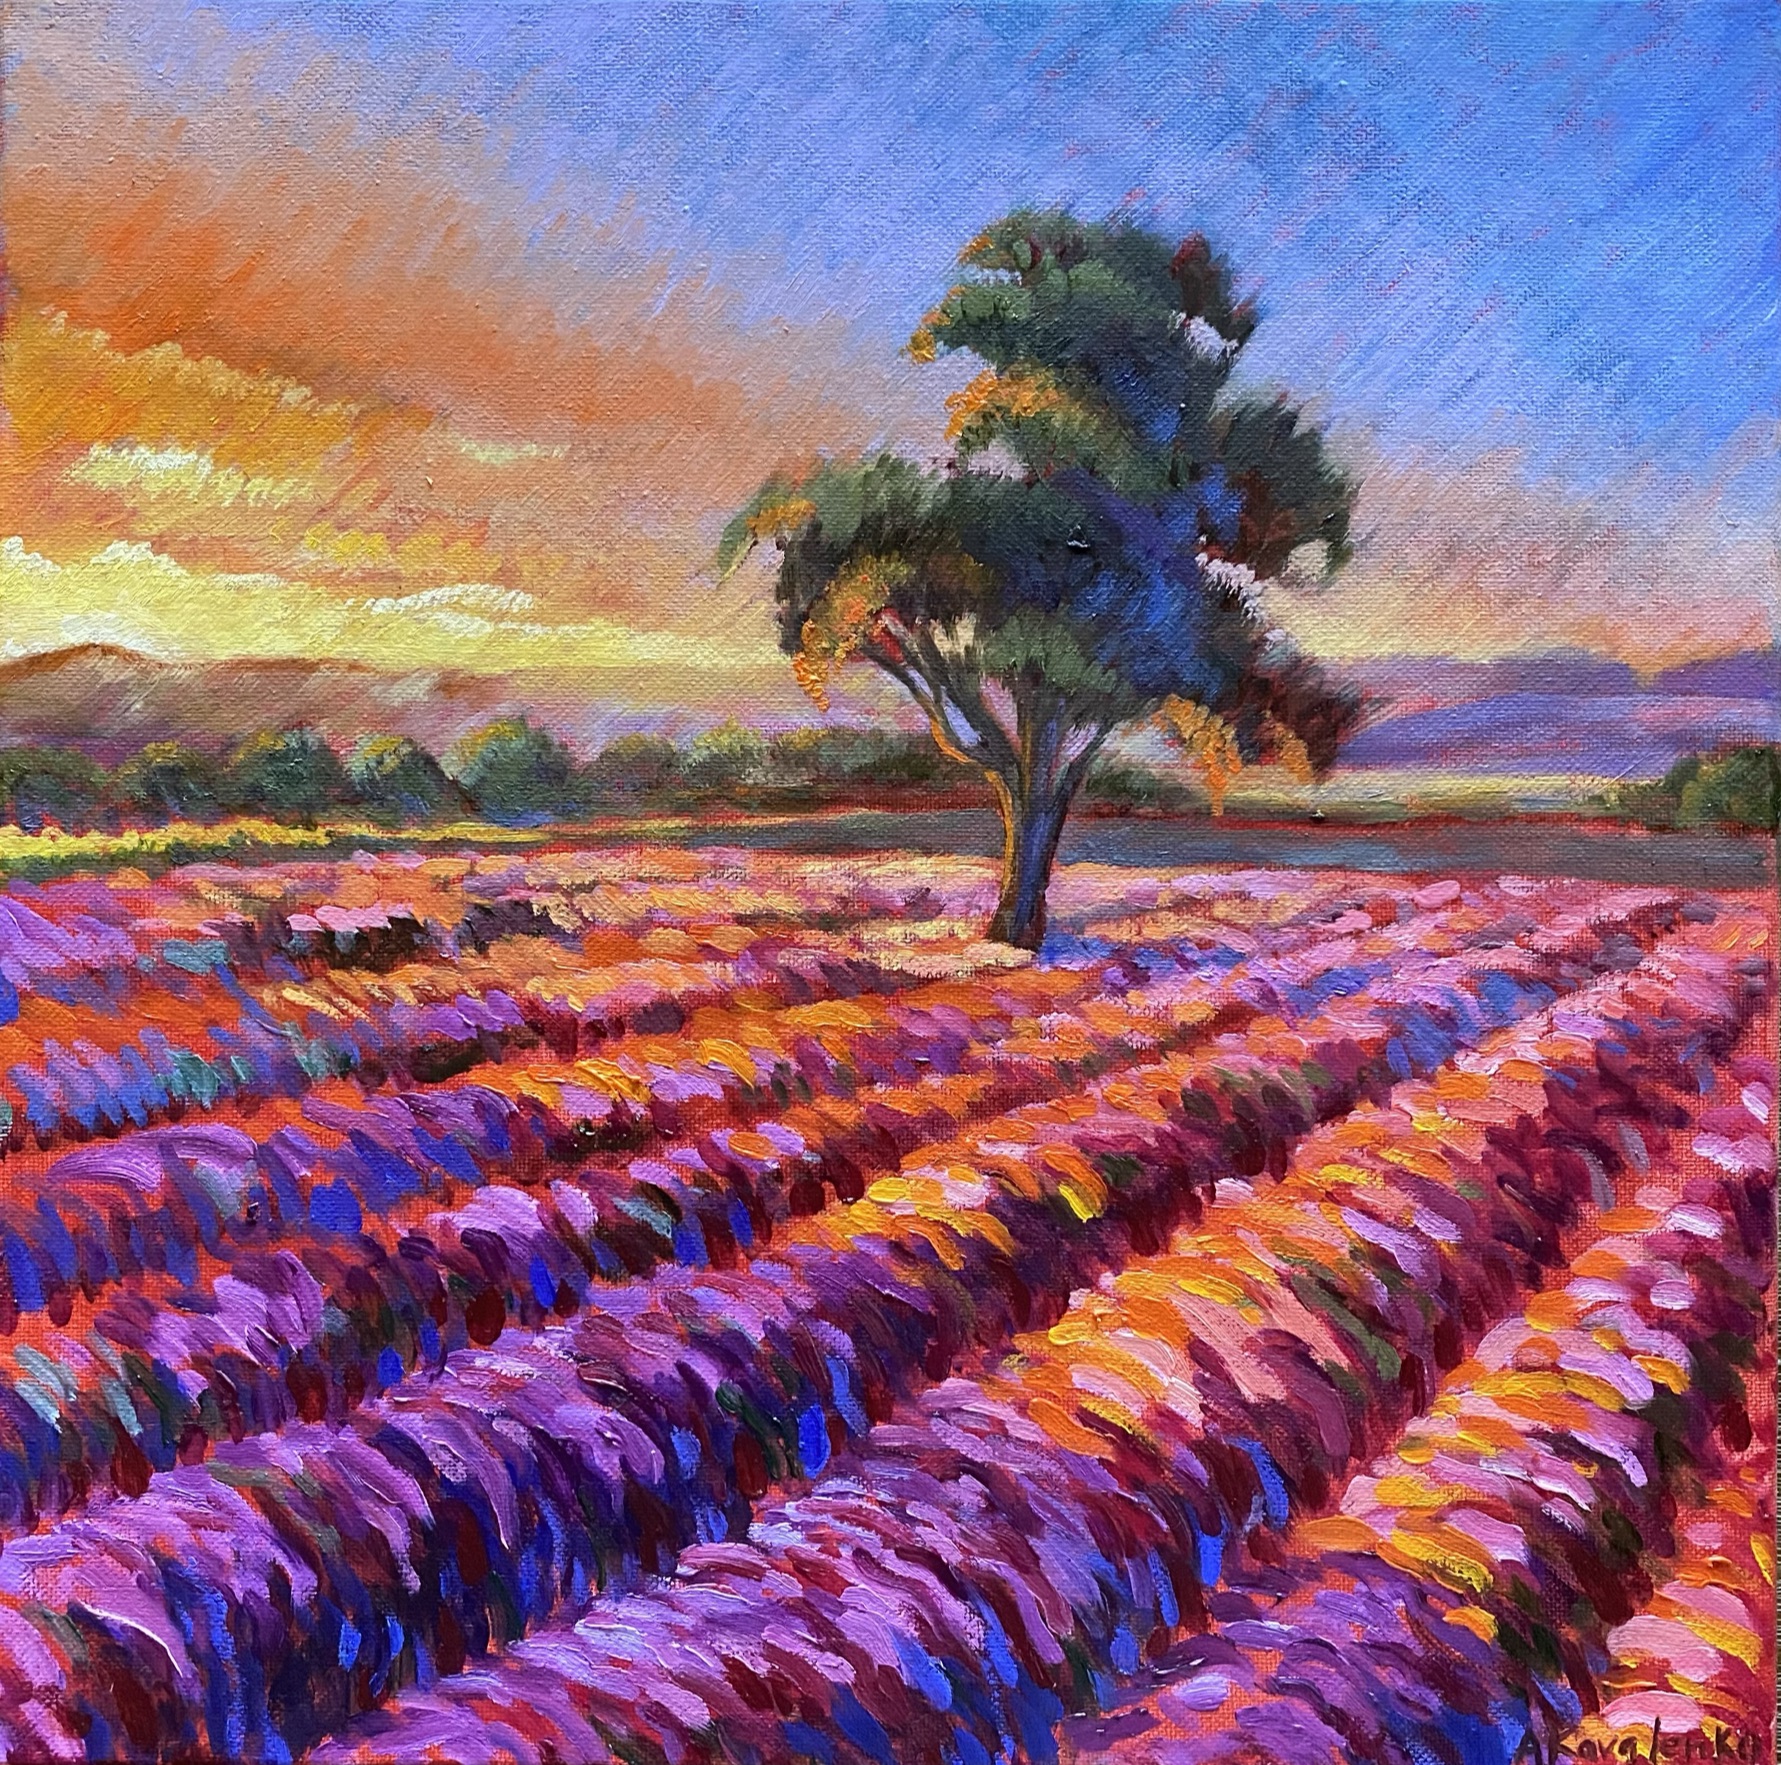 A painting of a meadow at sunset in tones of purple , orange, yellow and red